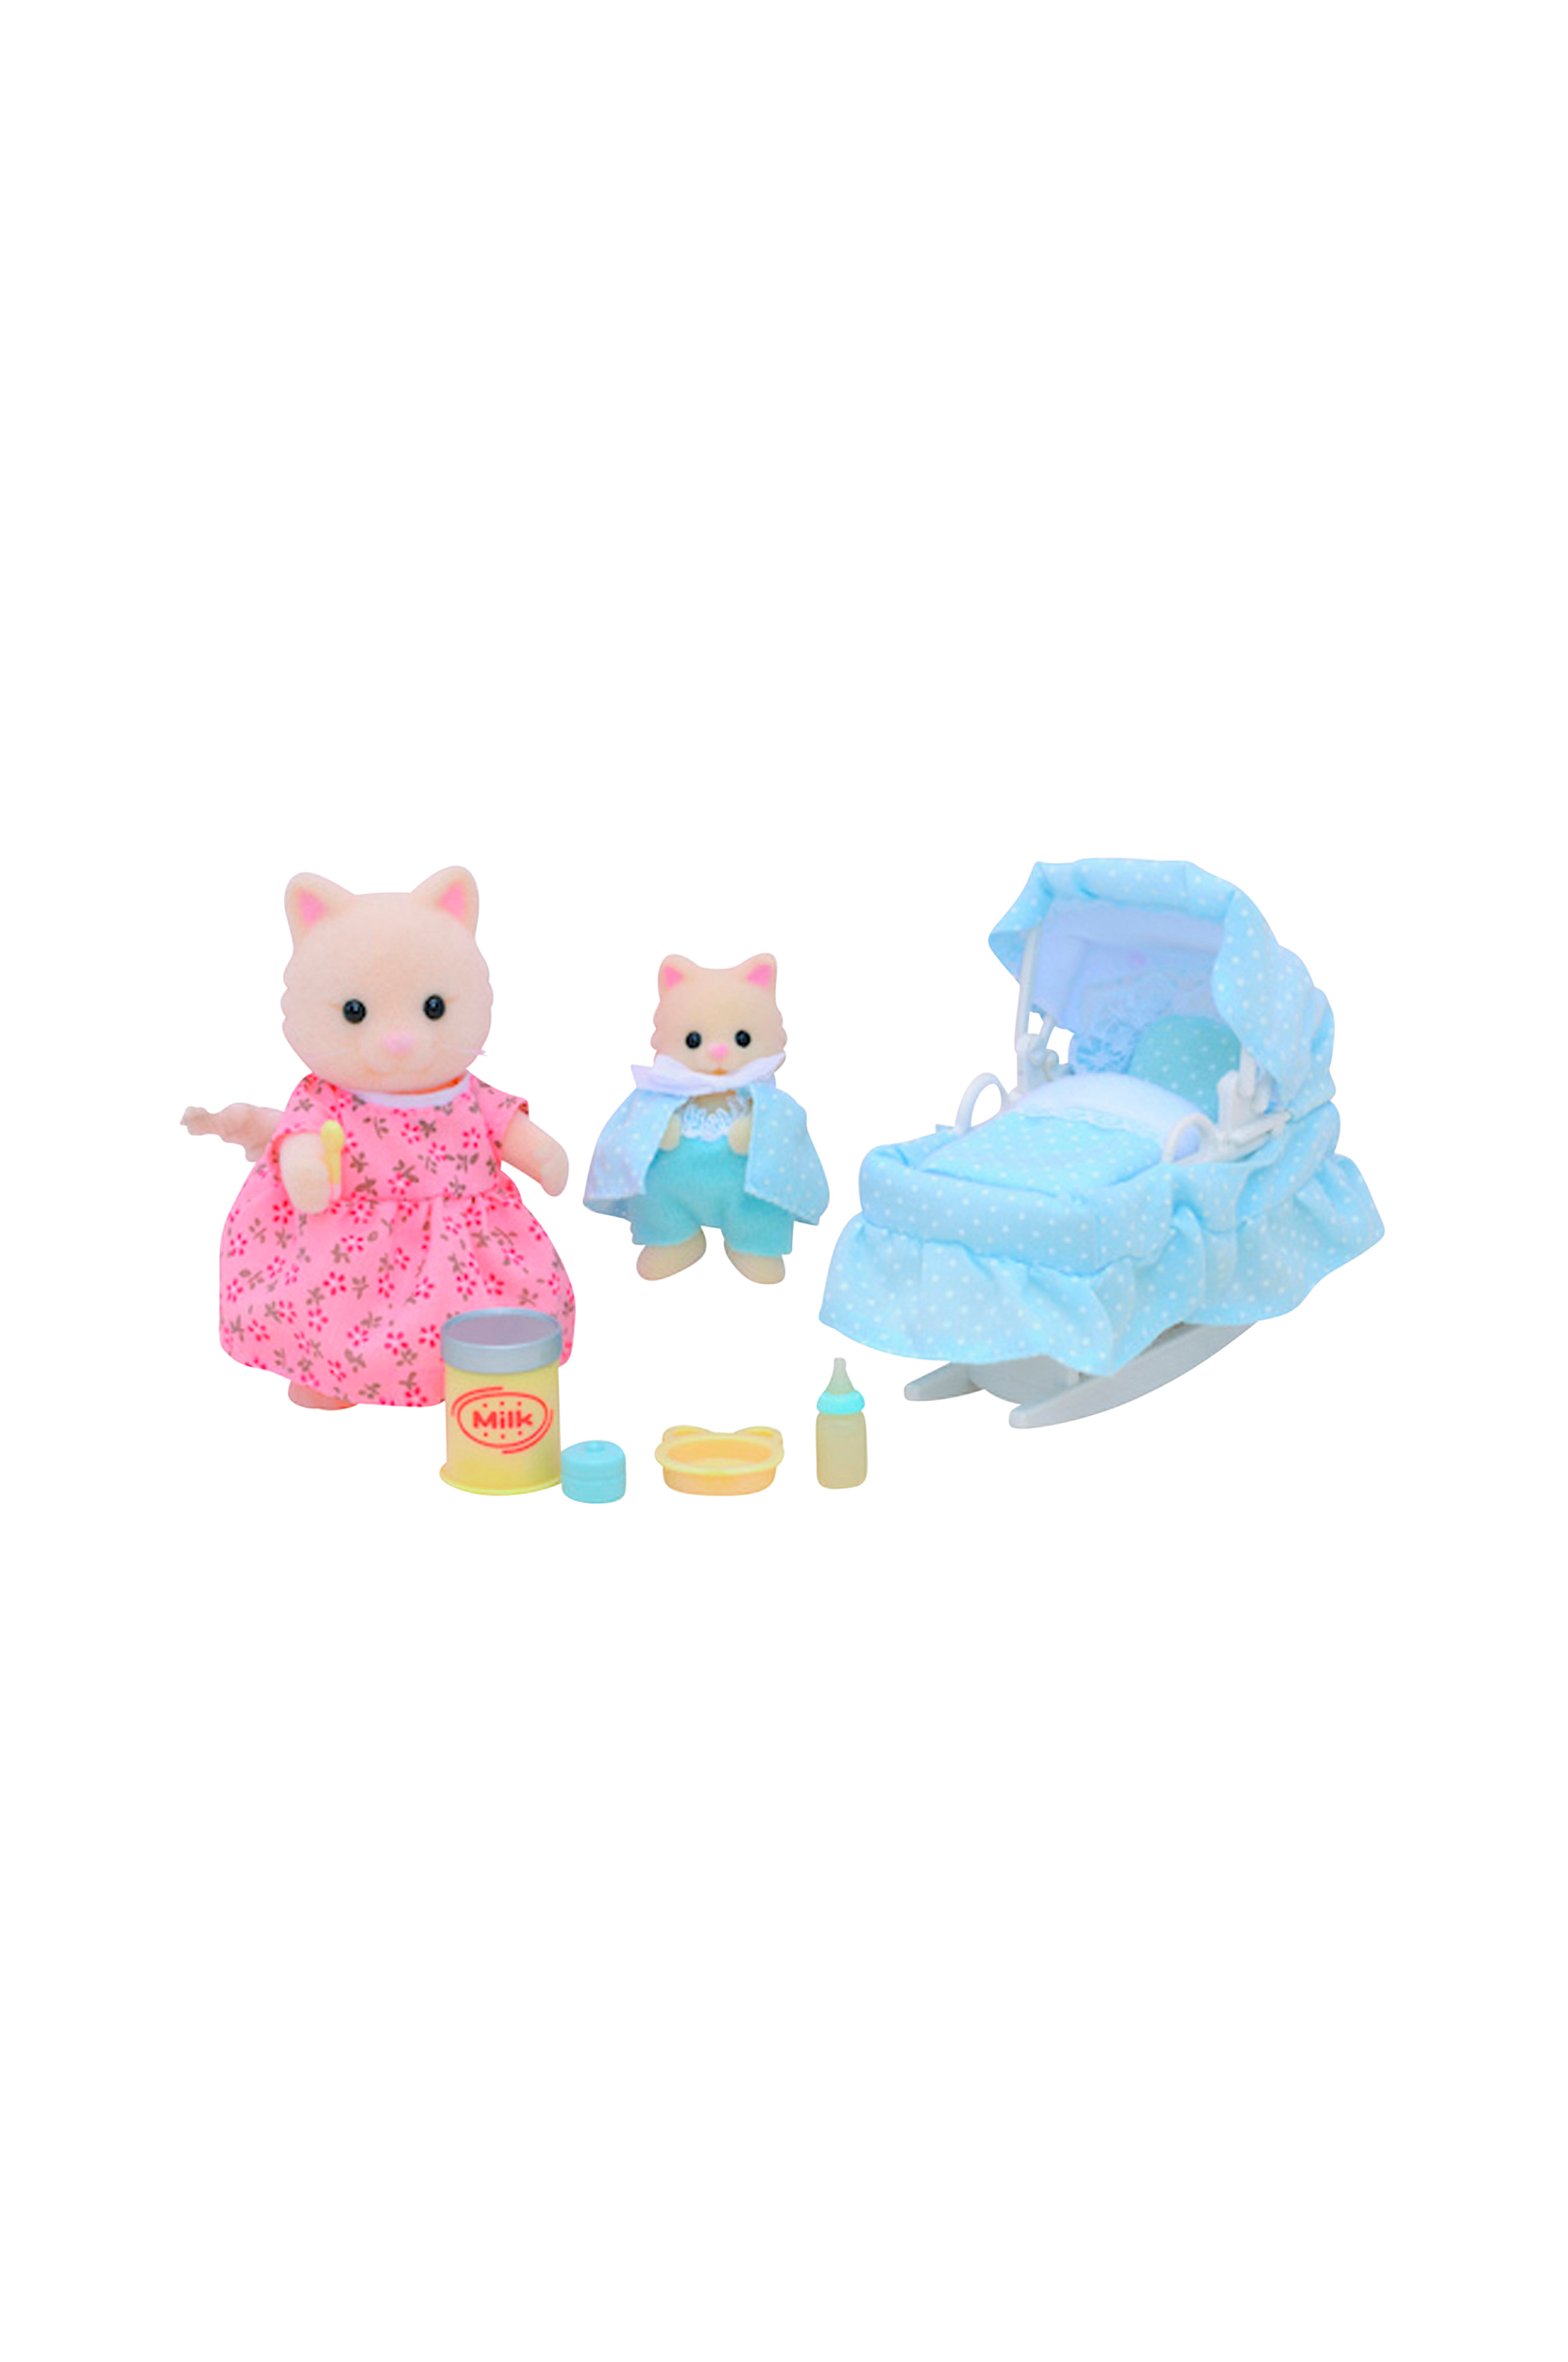 The New Arrival, Sylvanian Families